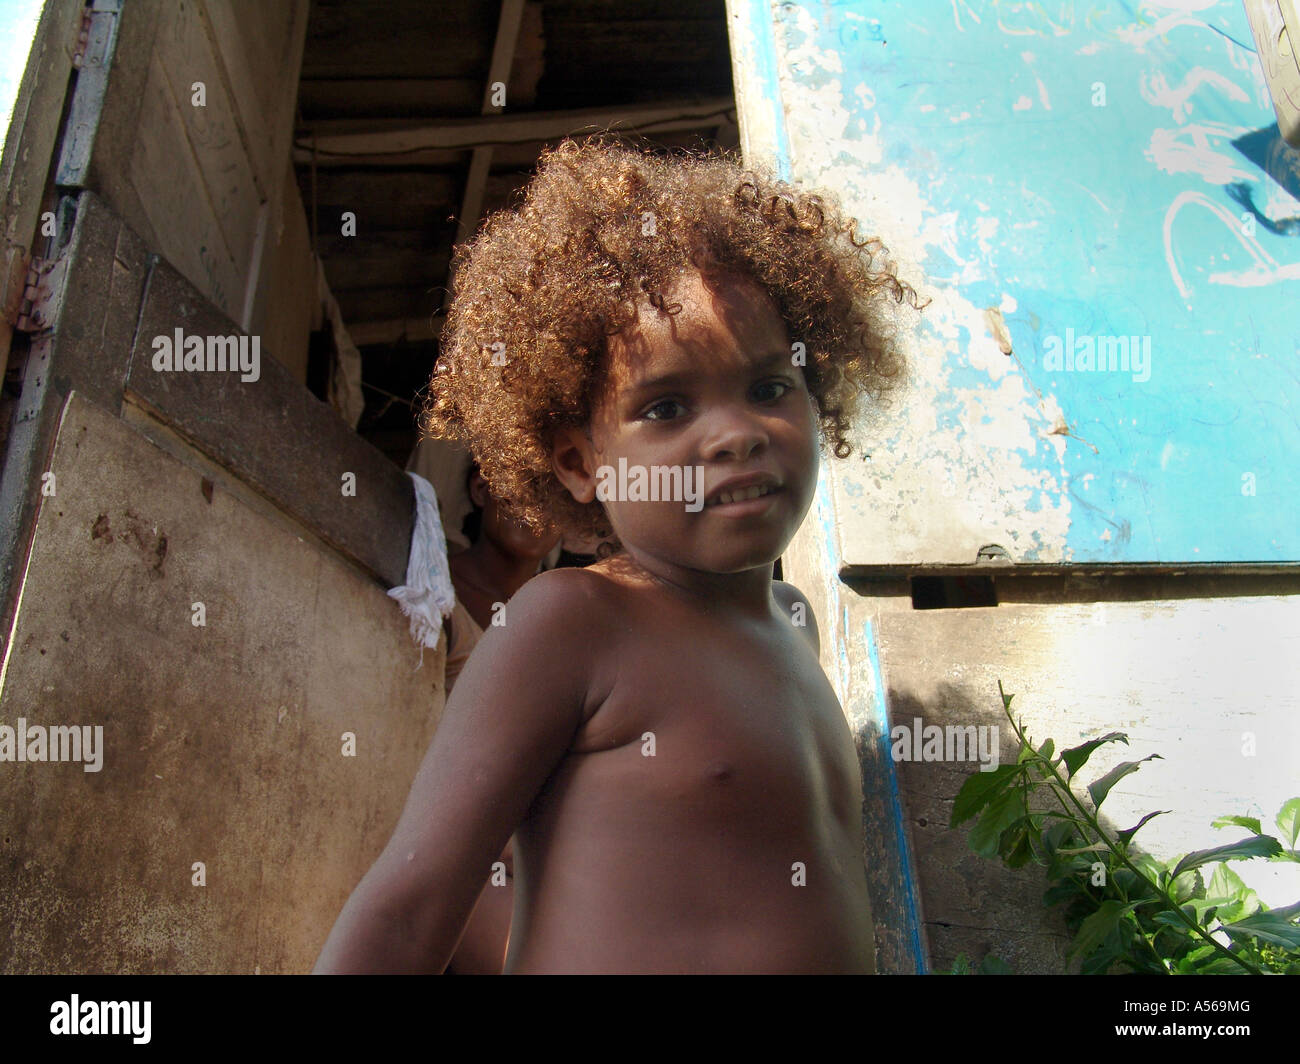 Painet iy8135 brazil children kids boys belo horizonte 2005 country  developing nation less economically developed culture Stock Photo - Alamy